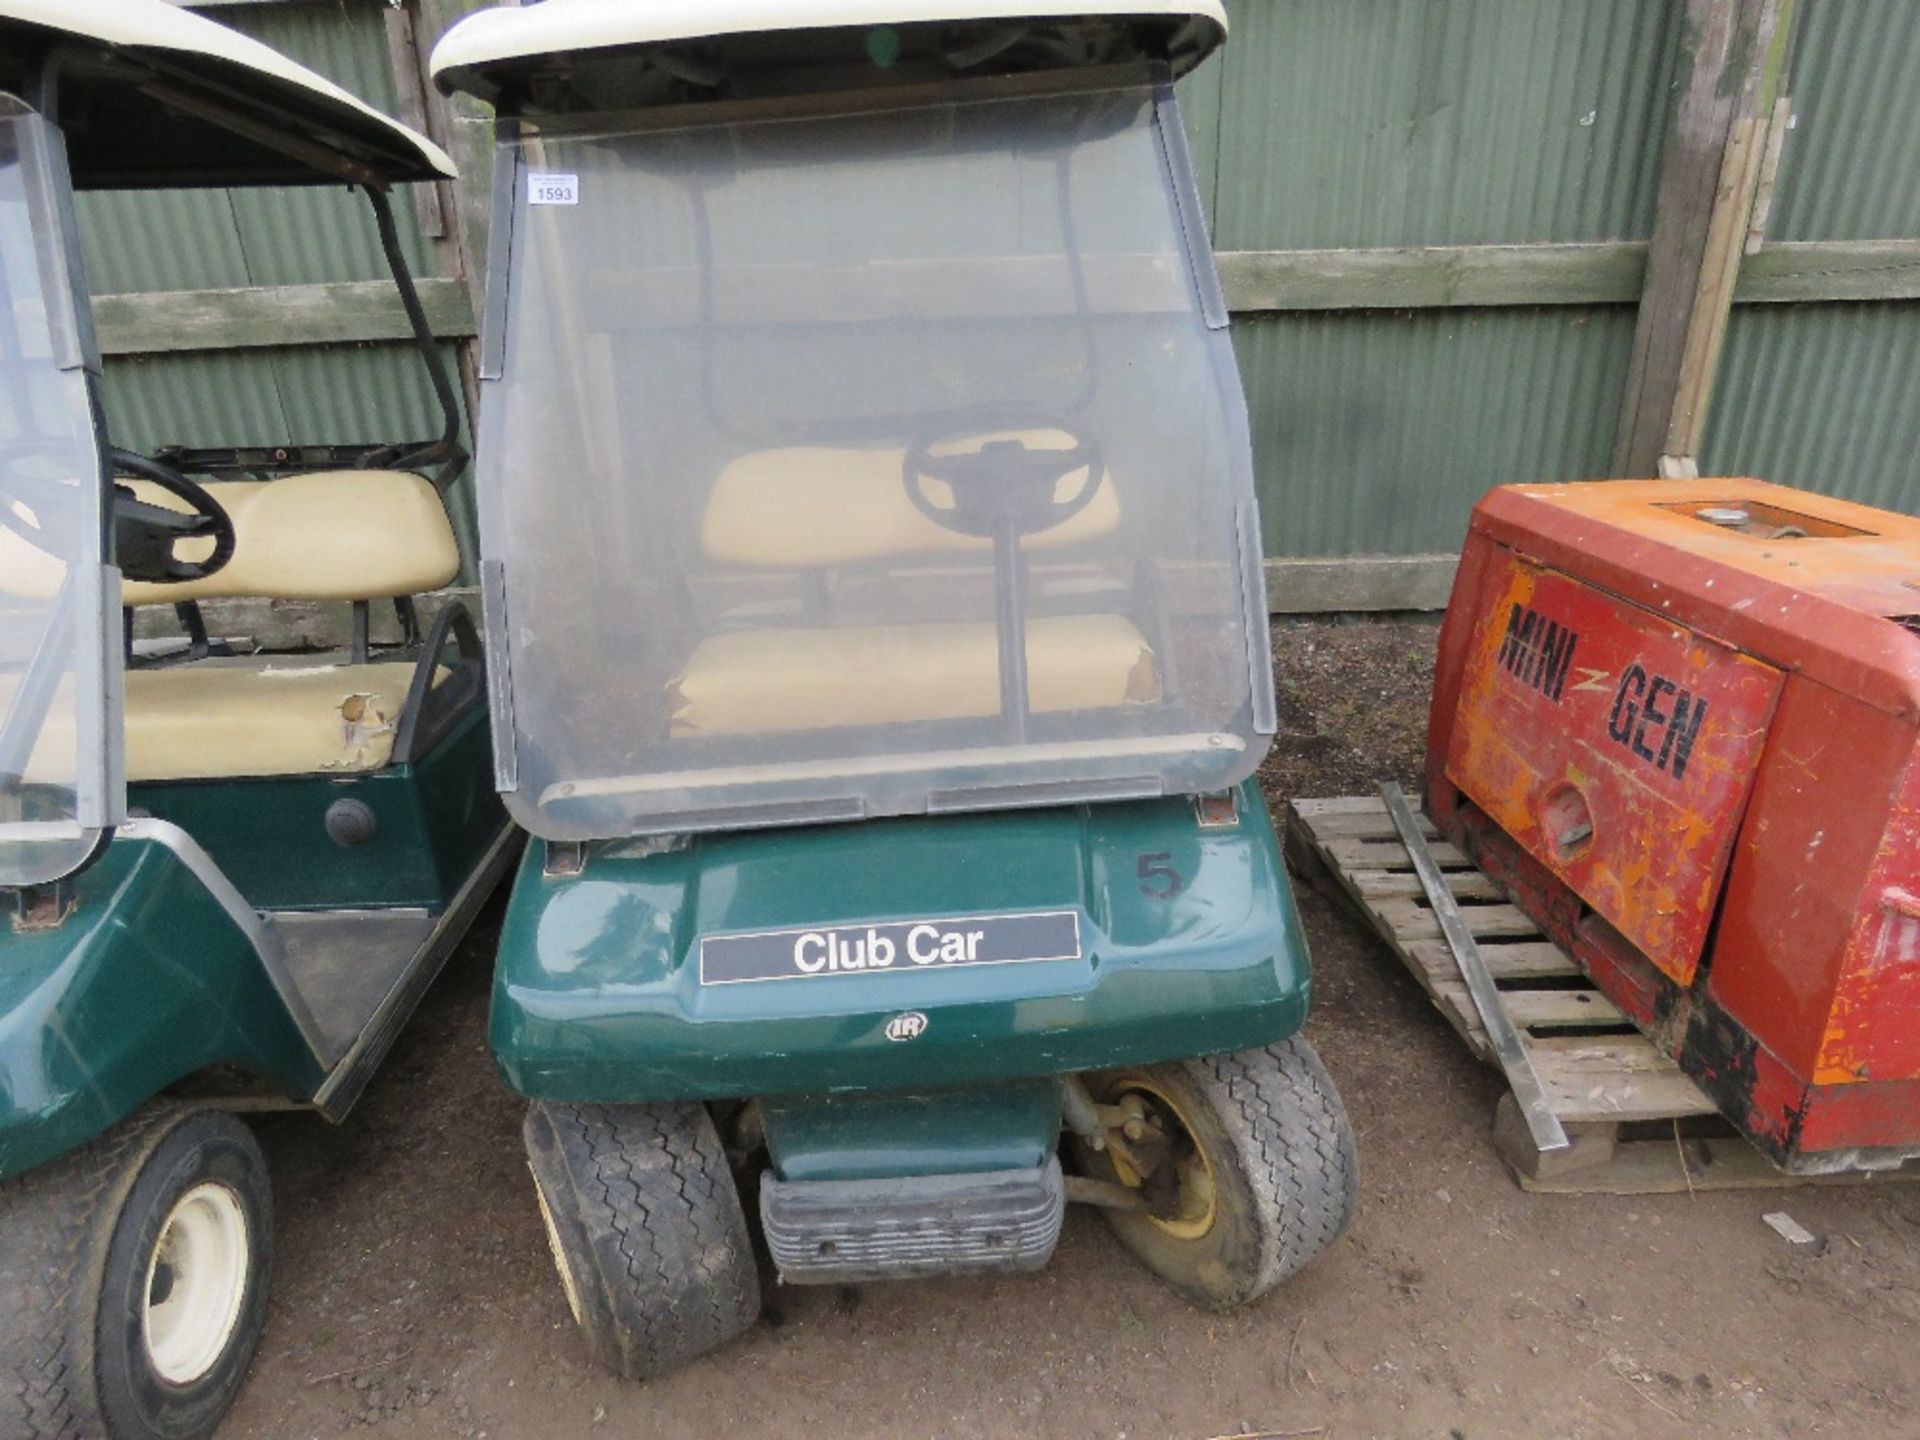 CLUBCAR PETROL ENGINED GOLF CART. BEEN STORED FOR SOME TIME, UNTESTED. - Image 3 of 8